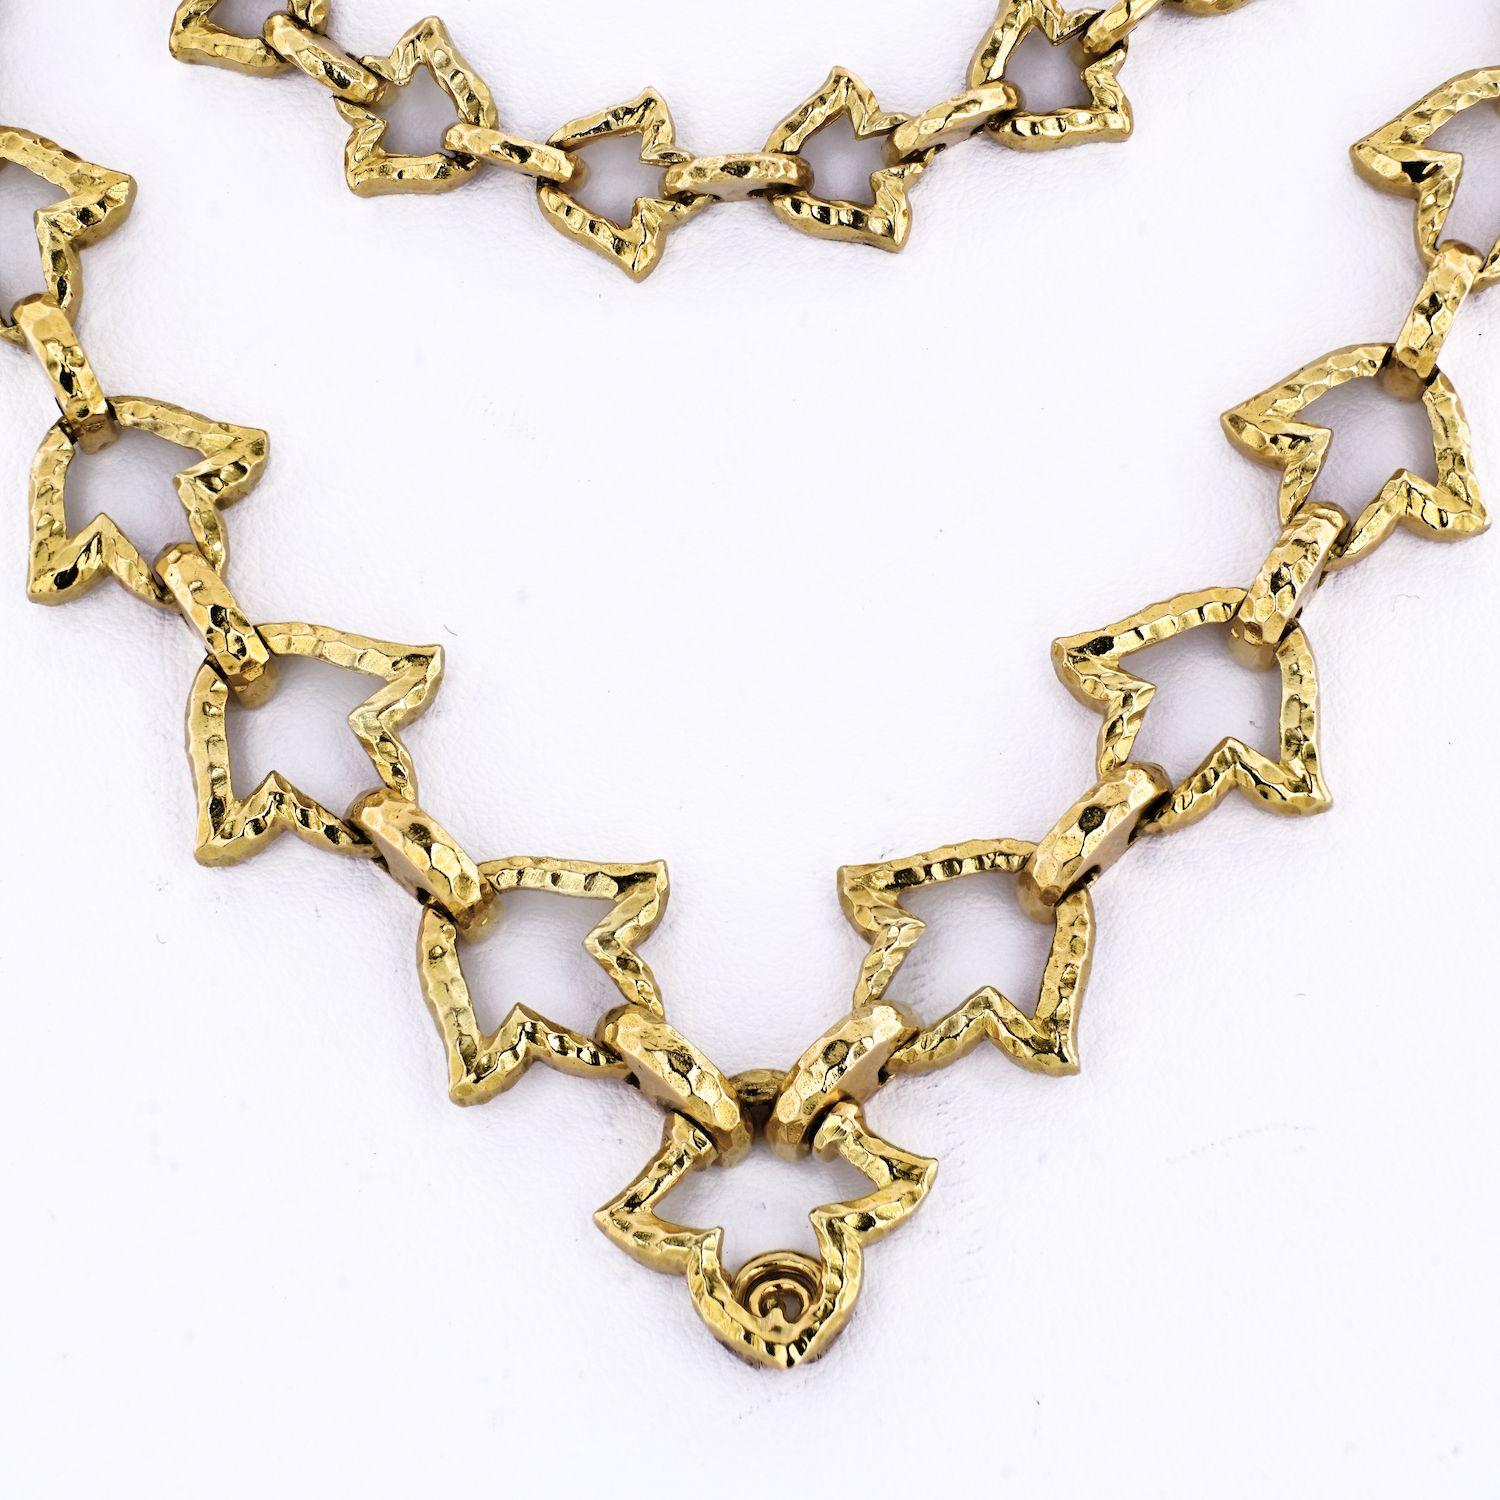 David Webb vintage link chain necklace. 
The necklace has a chain extension that can be removed to shorten the length 14 inches.
Necklace Length: 20 inches - 34 inches.
This chain necklace is perfect for David Webb horoscope or other pendants.